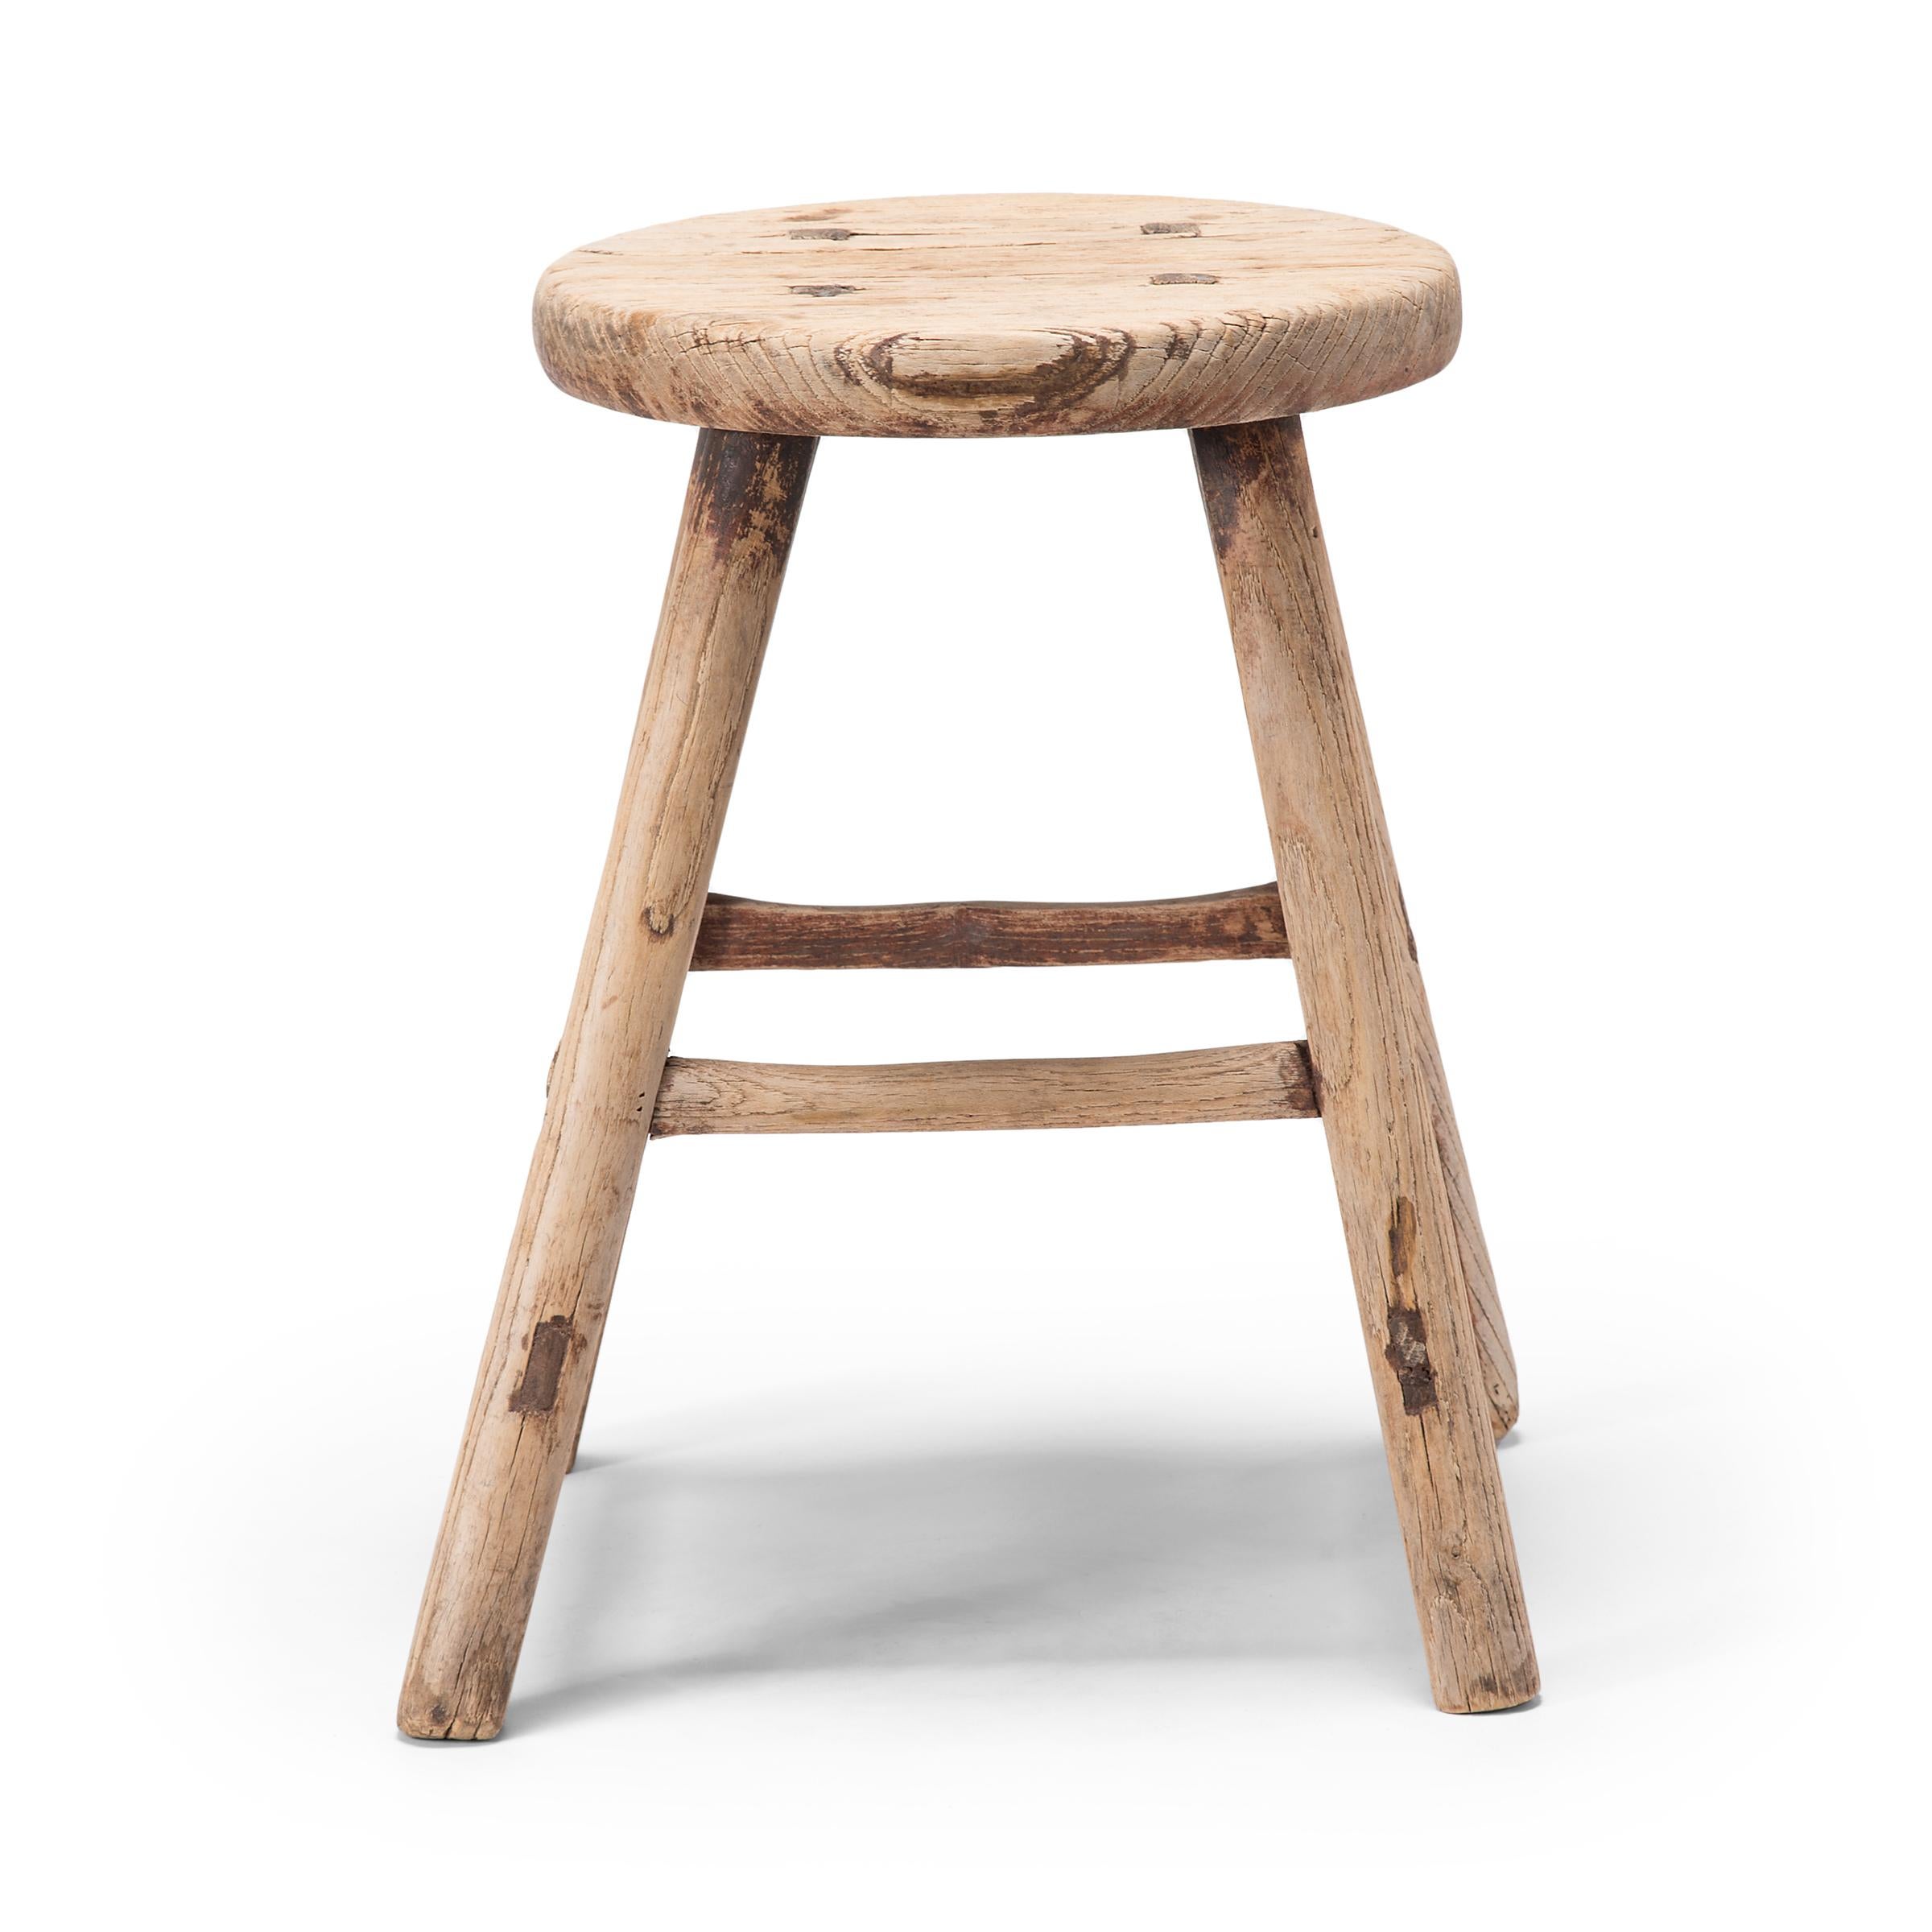 Qing Early 20th Century Chinese Provincial Flat-Sawn Stool